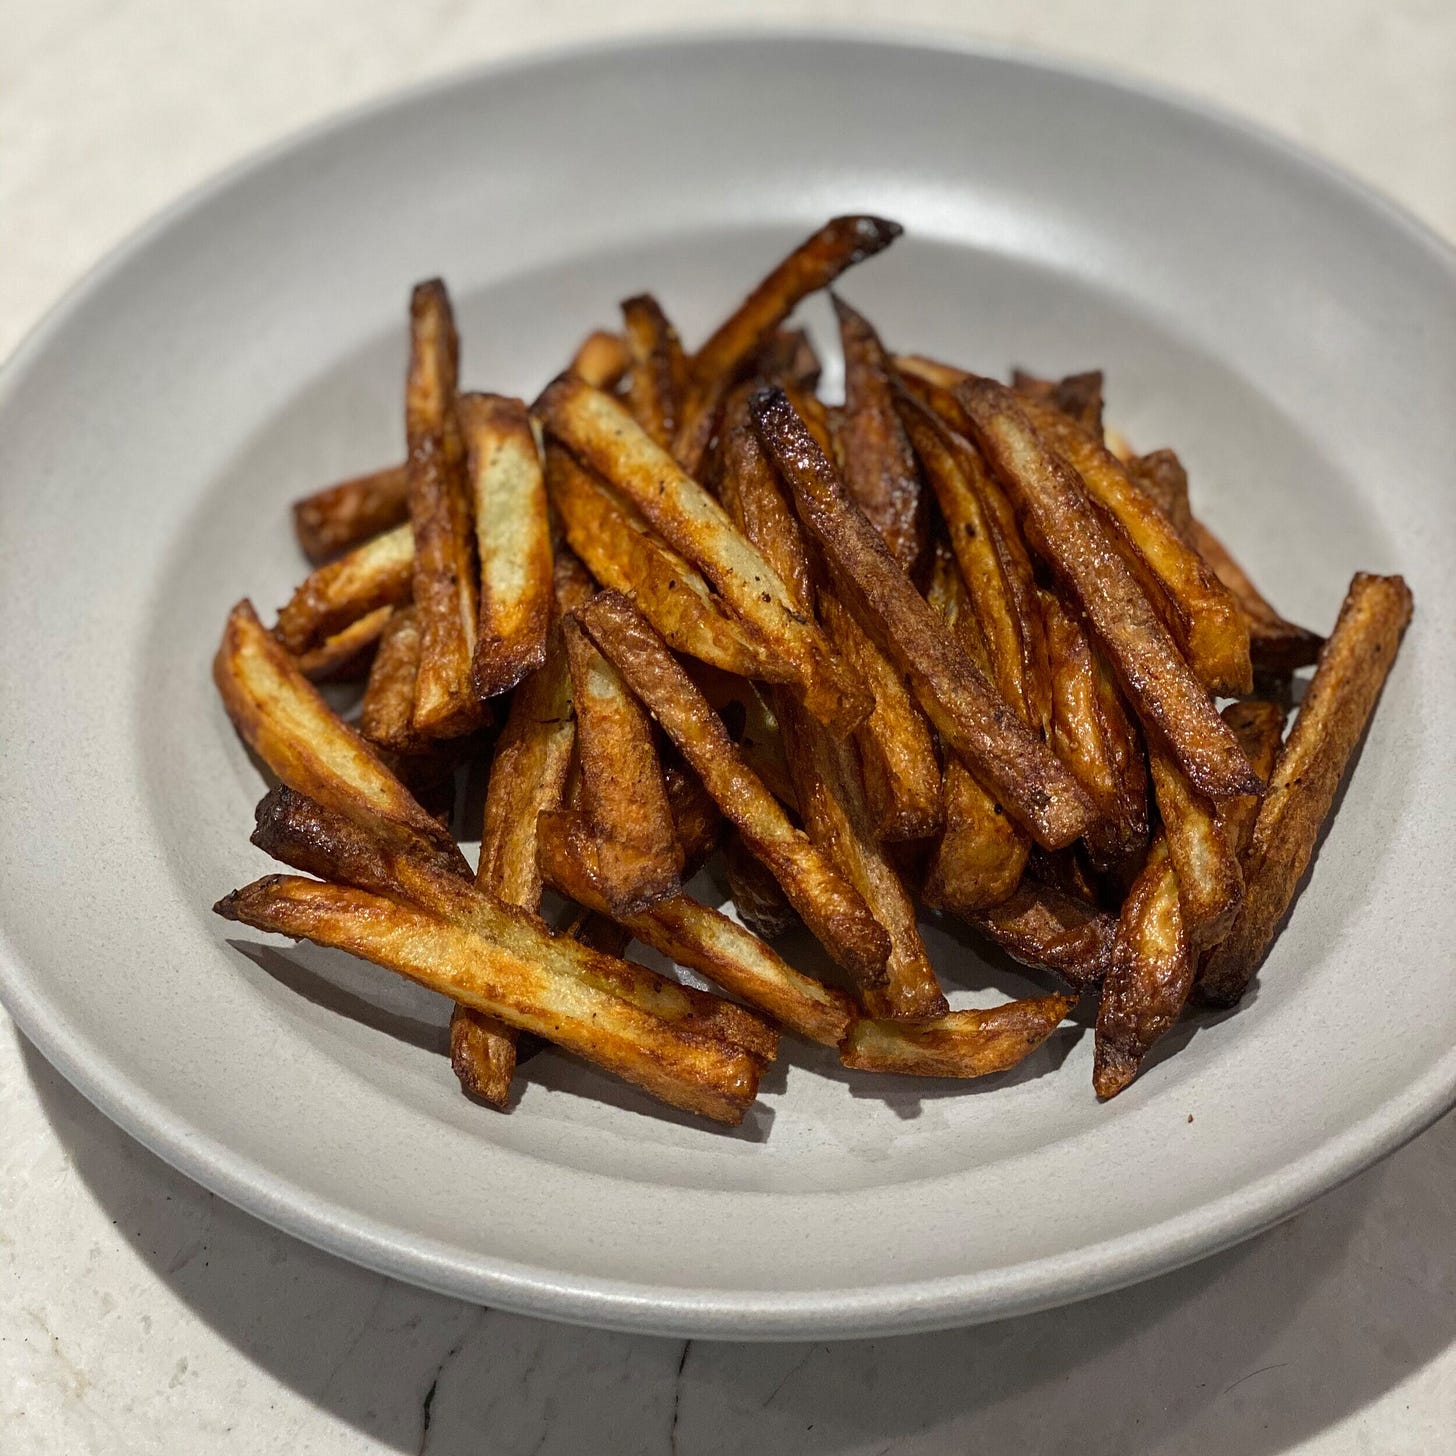 Fries made with avocado oil